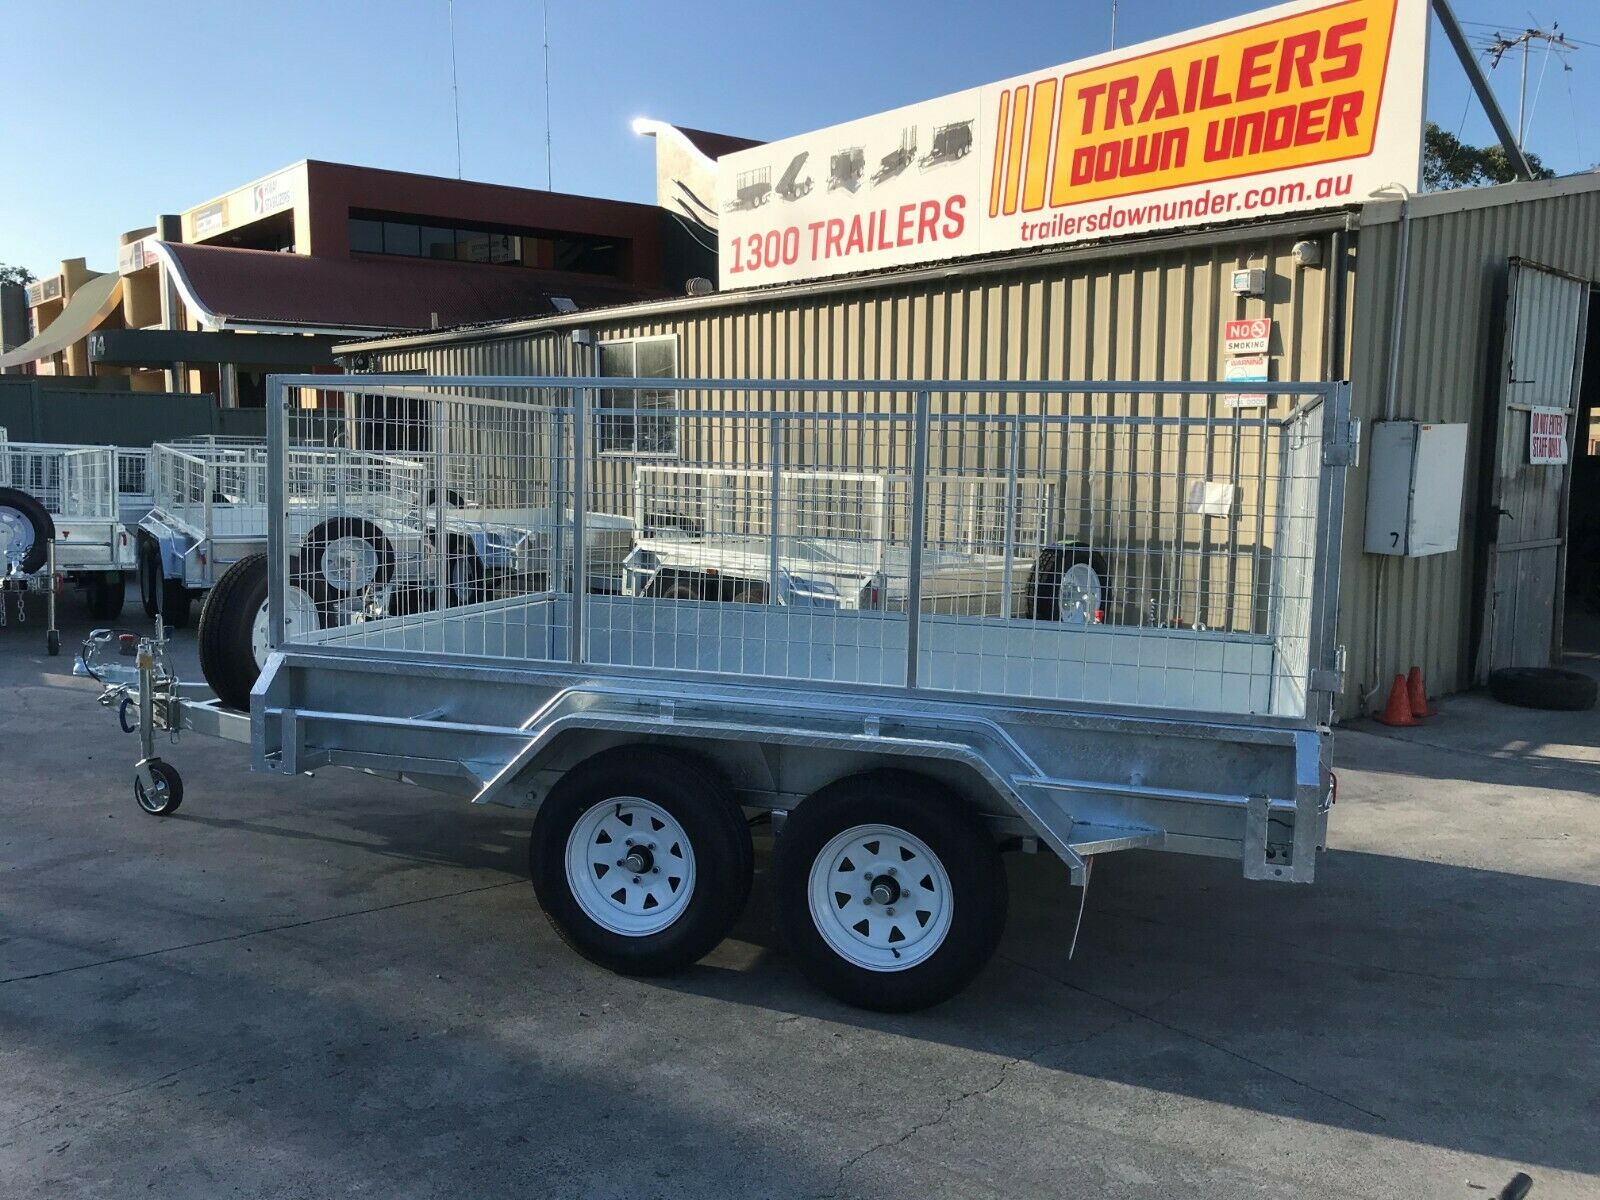 10×5 Galvanised Cage Trailer with 3 Ft Cage for Sale in Brisbane<br><br><span class="galv-import">Imported Trailer</span>